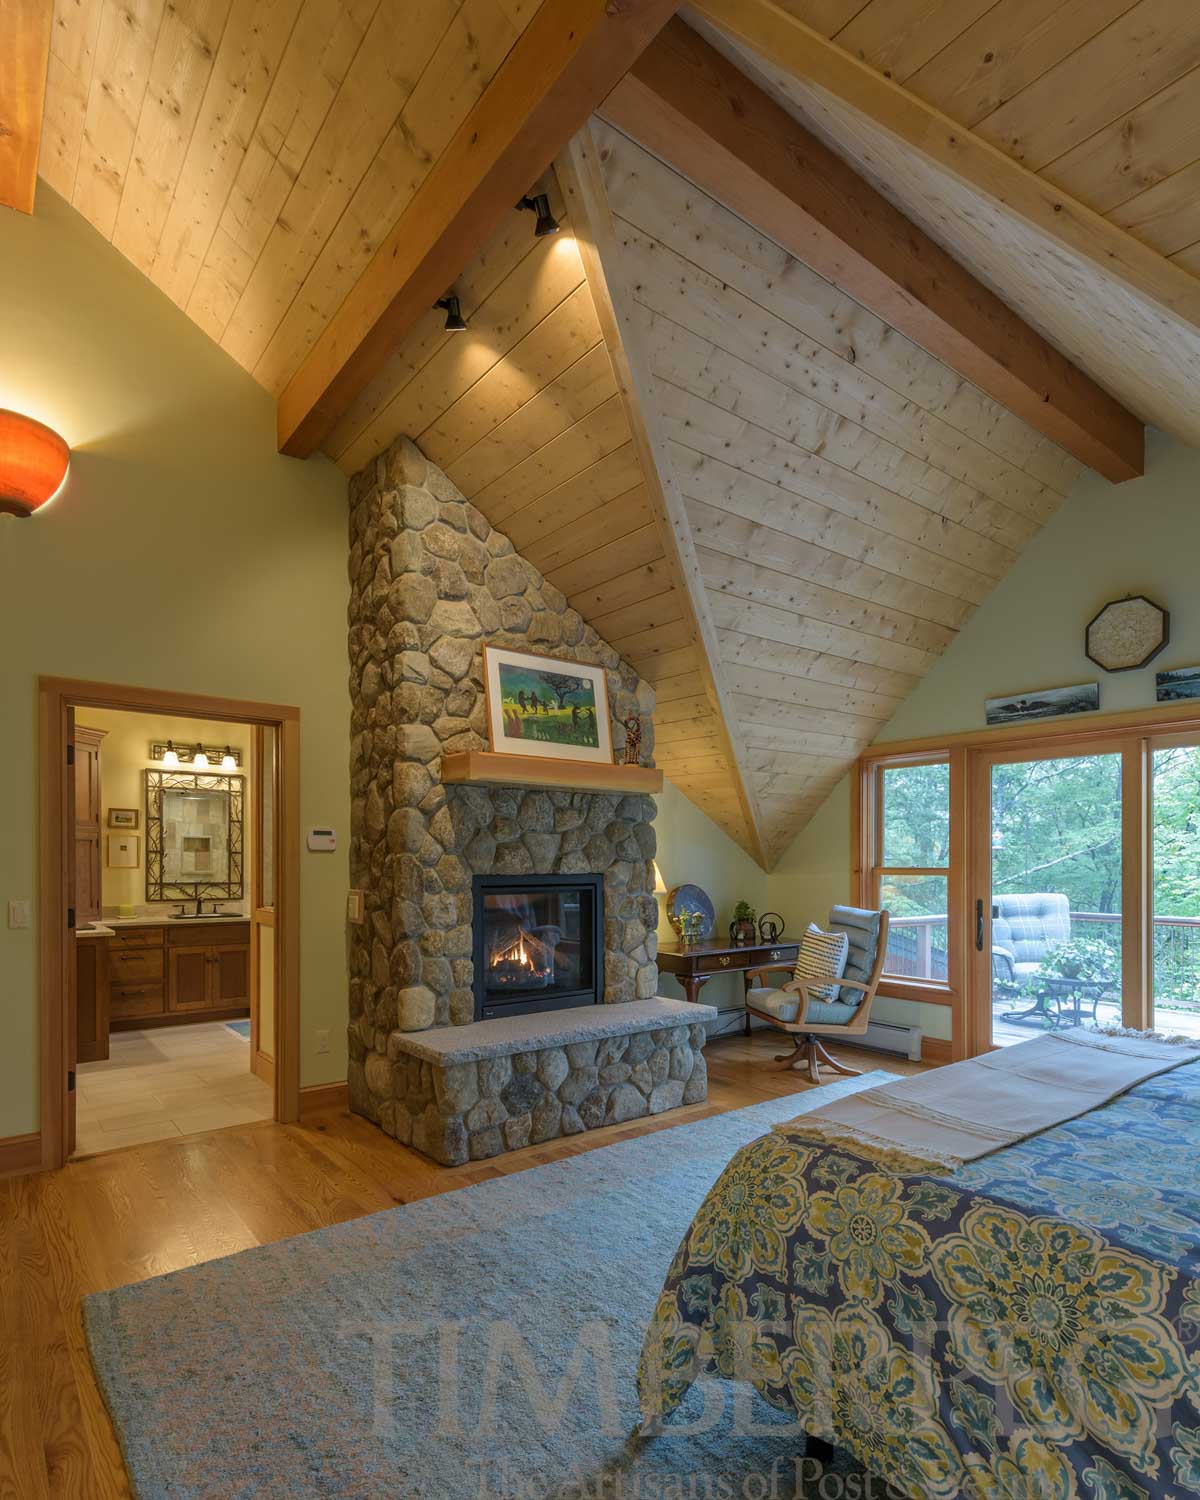 South Sutton, NH (T01212) bedroom with irregular ceiling and stone fireplace